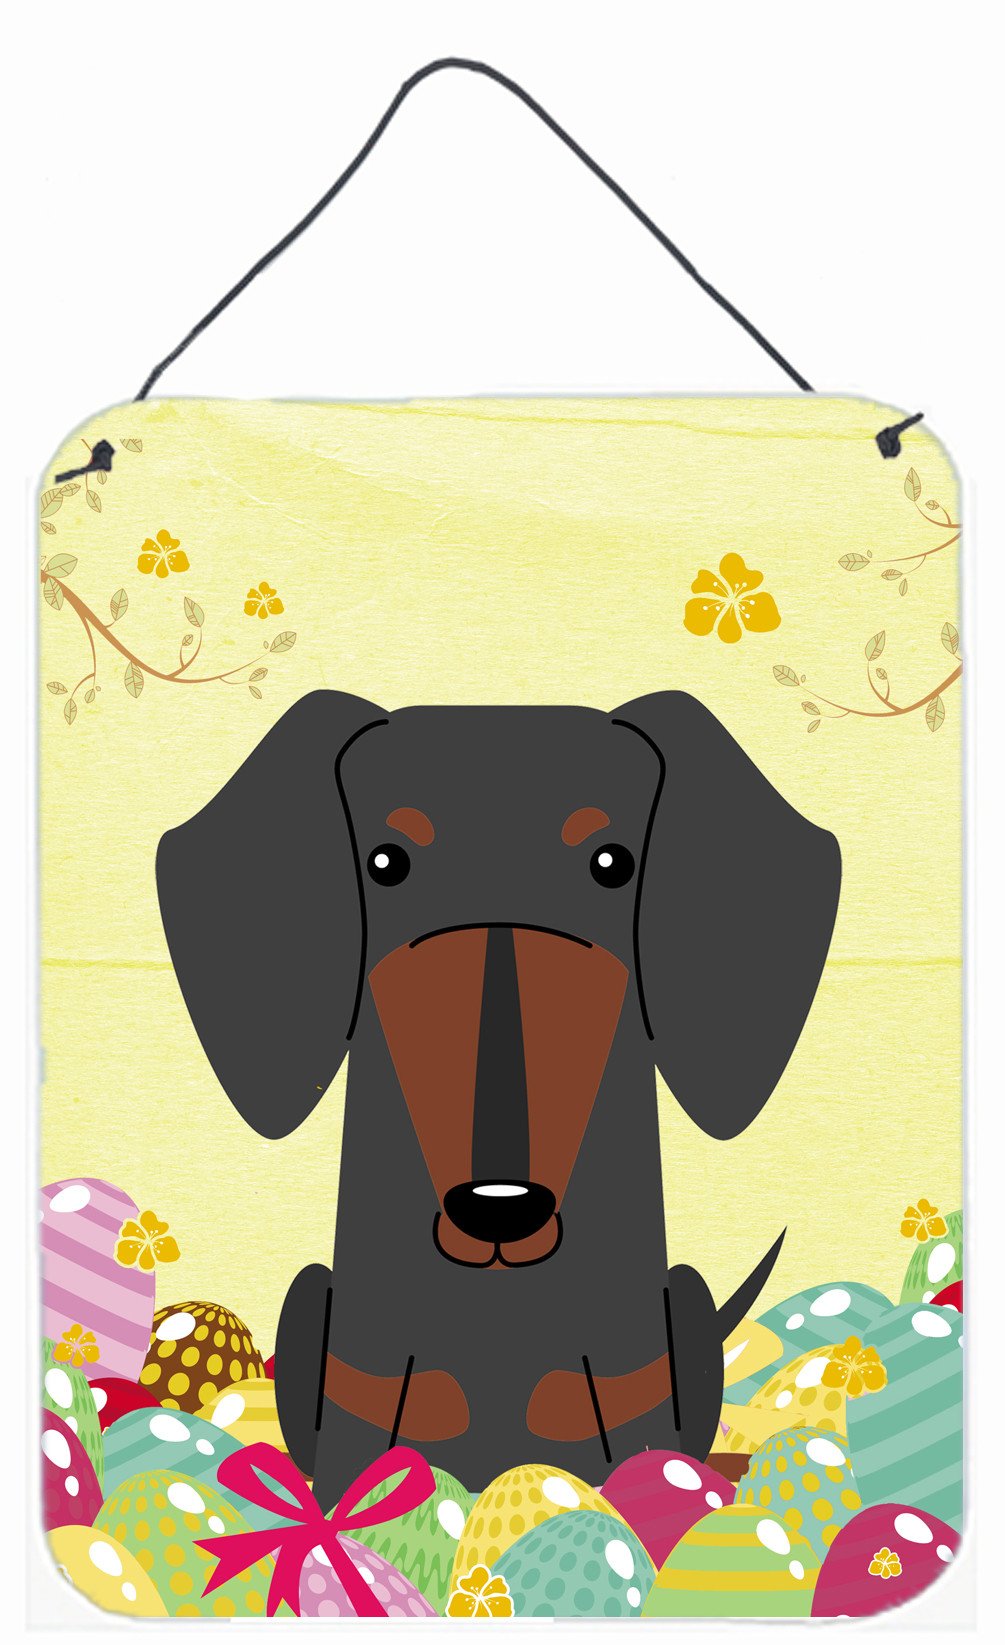 Easter Eggs Dachshund Black Tan Wall or Door Hanging Prints BB6132DS1216 by Caroline's Treasures